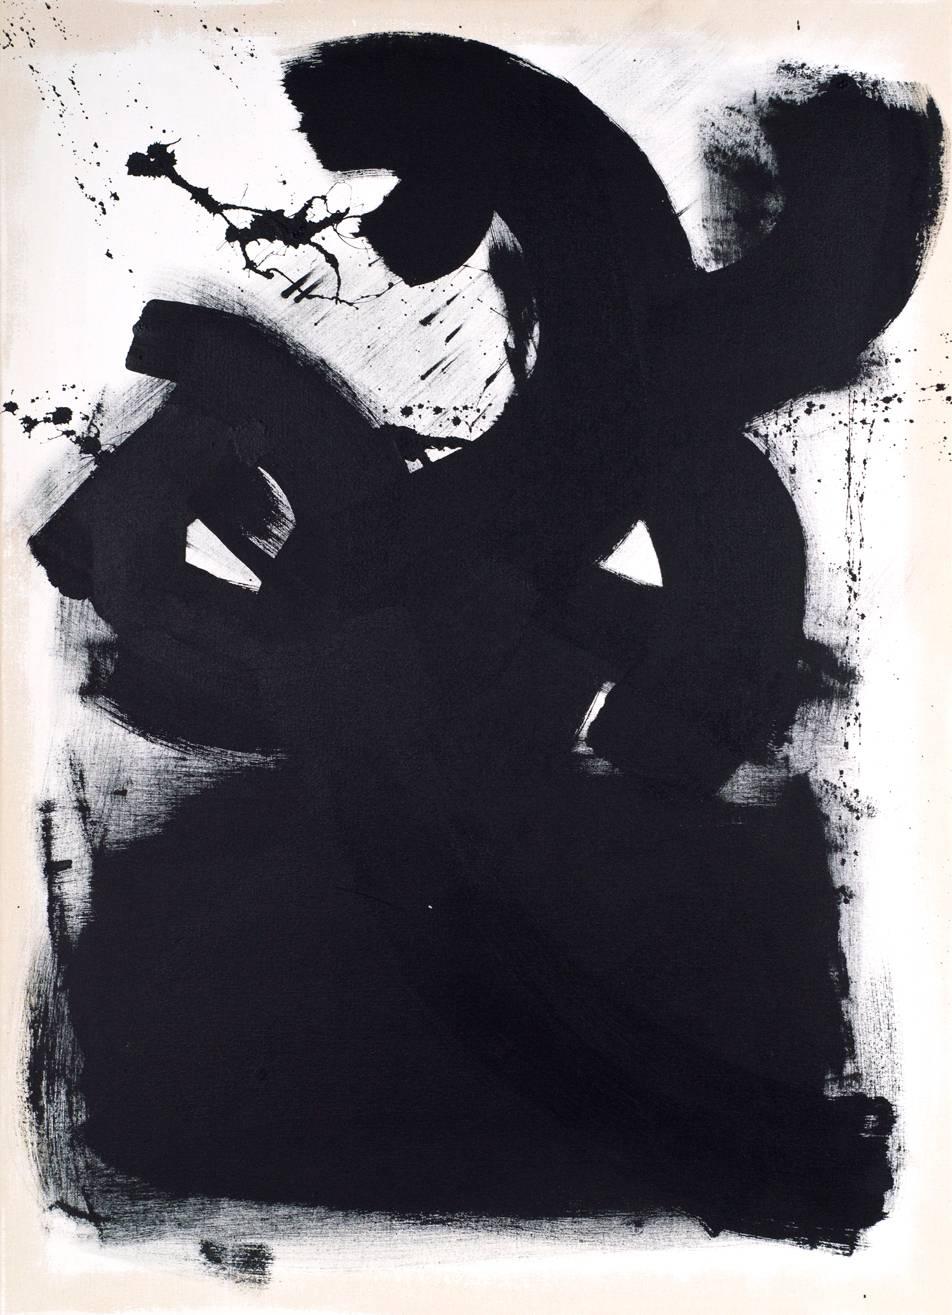 Jose Buelo, Untitled, Black and White Abstract on Canvas, 2018 1